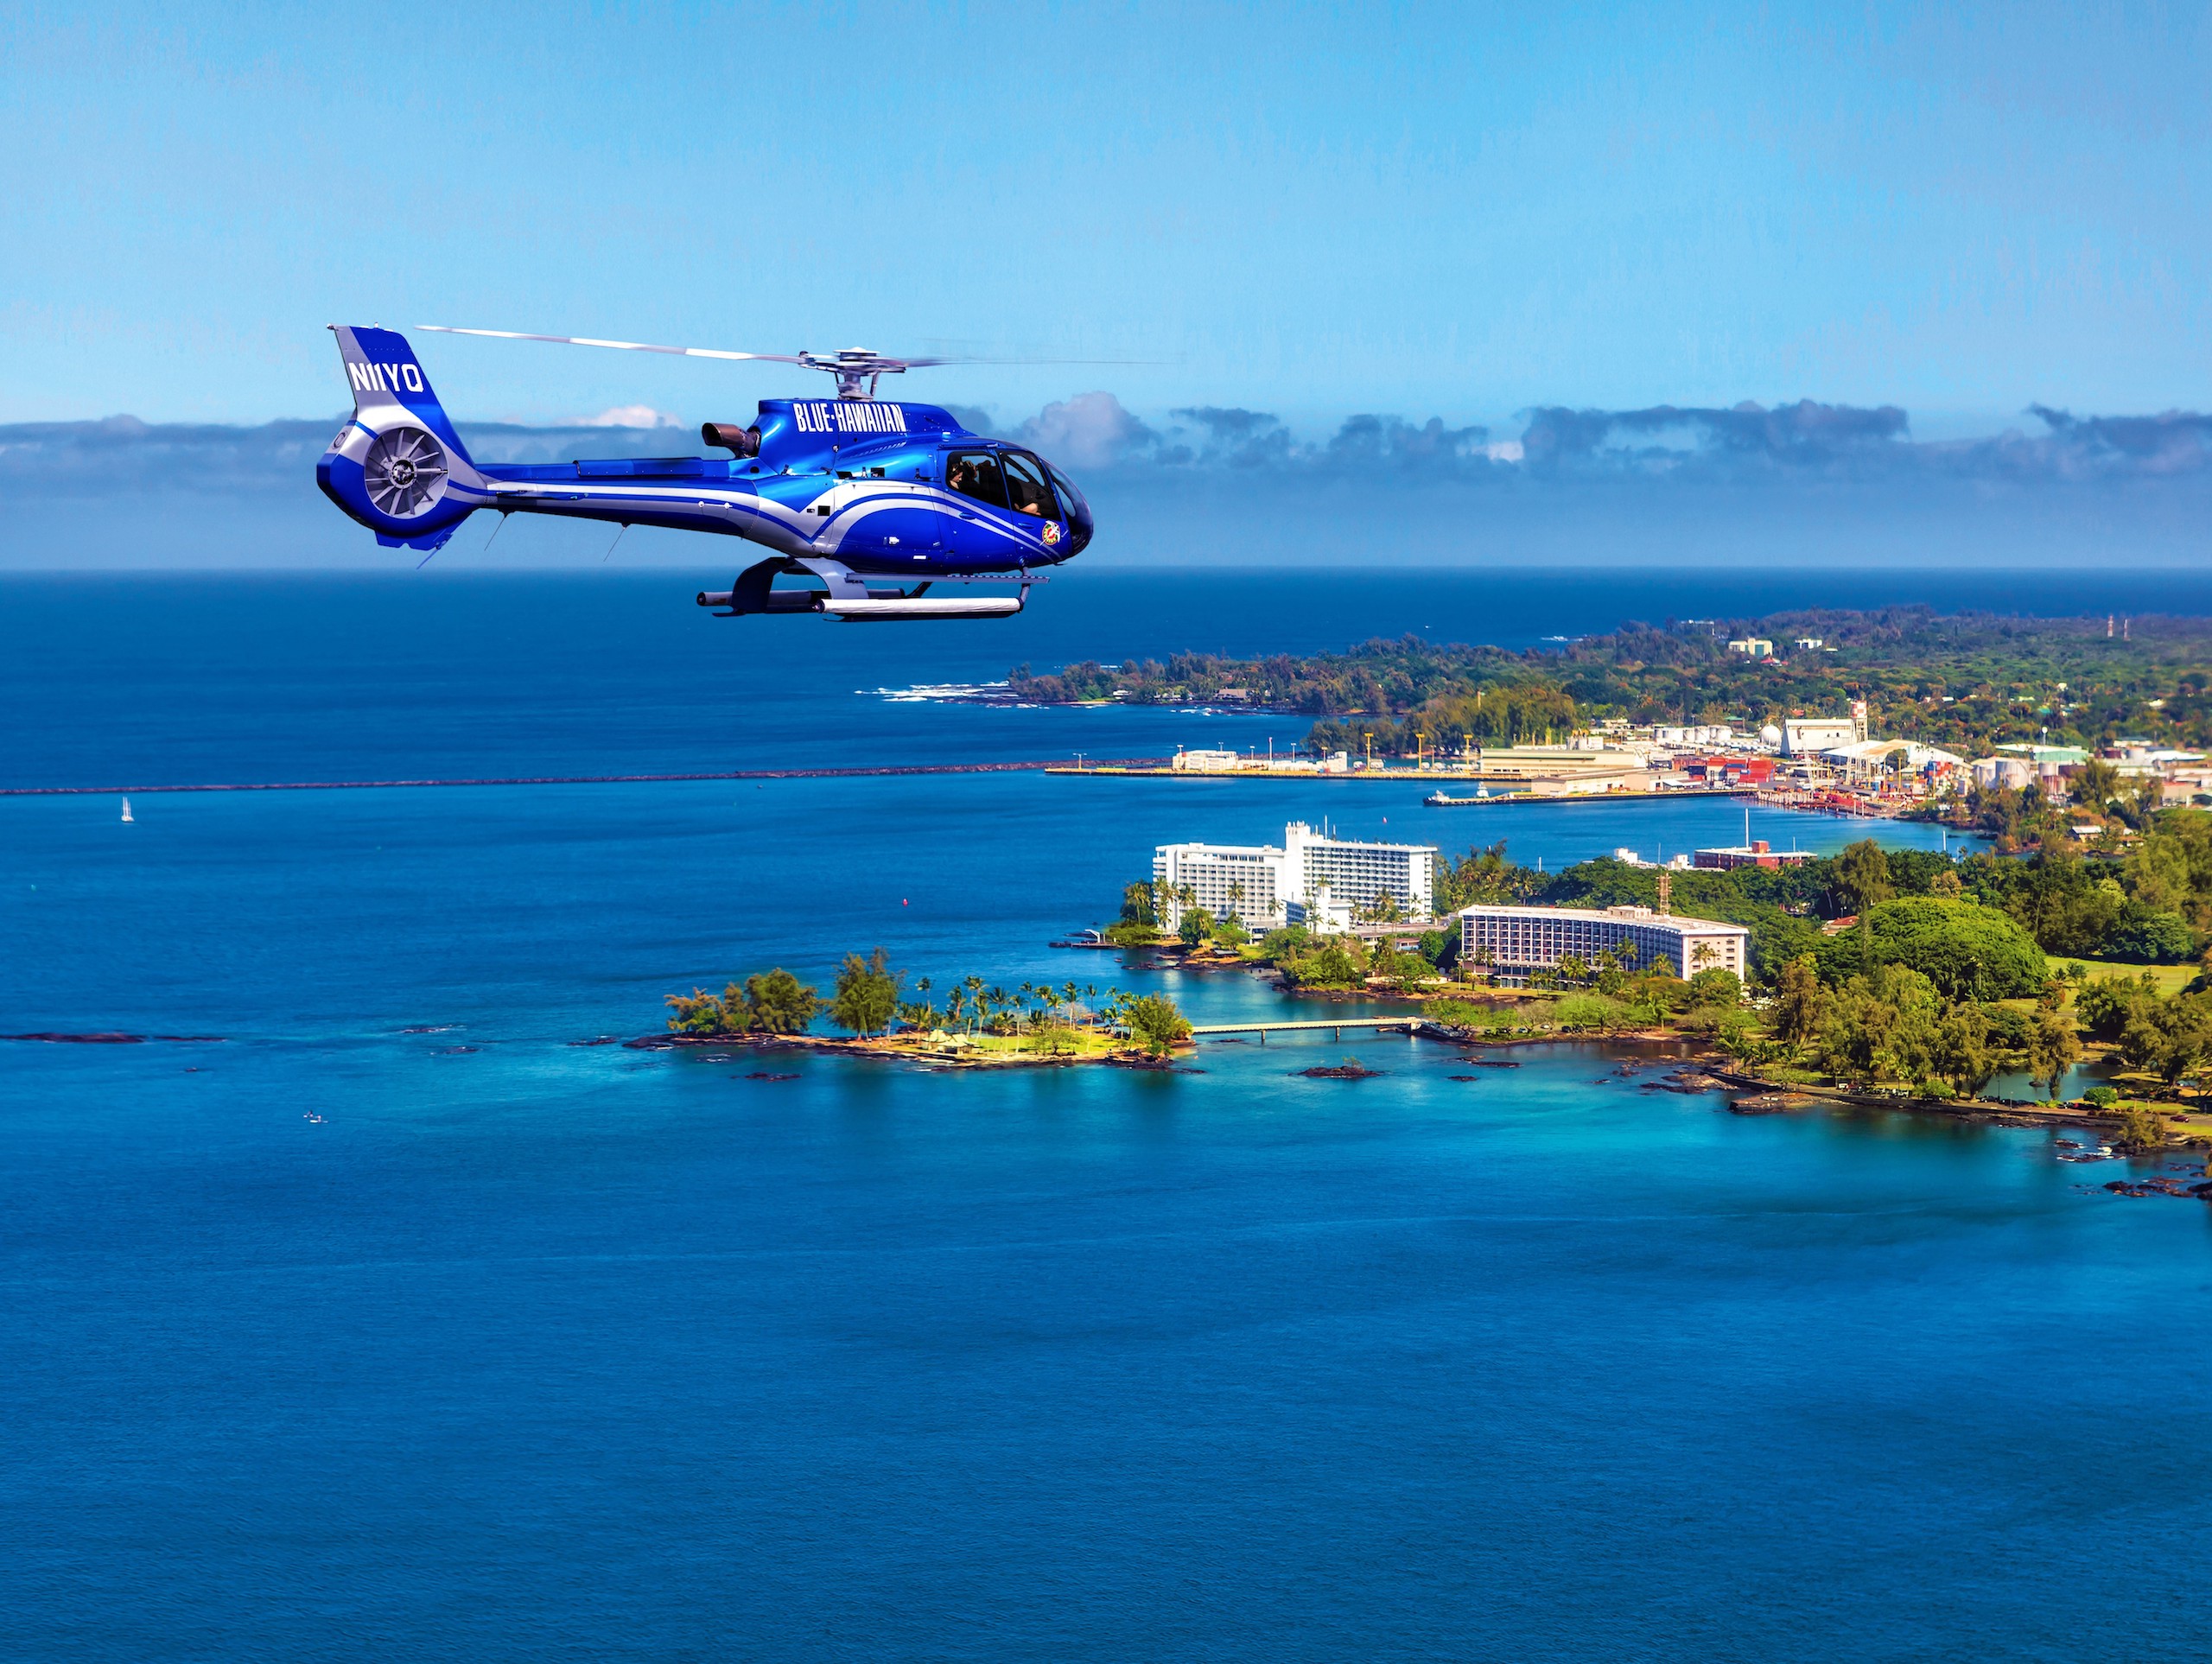 best helicopter tour hilo hawaii